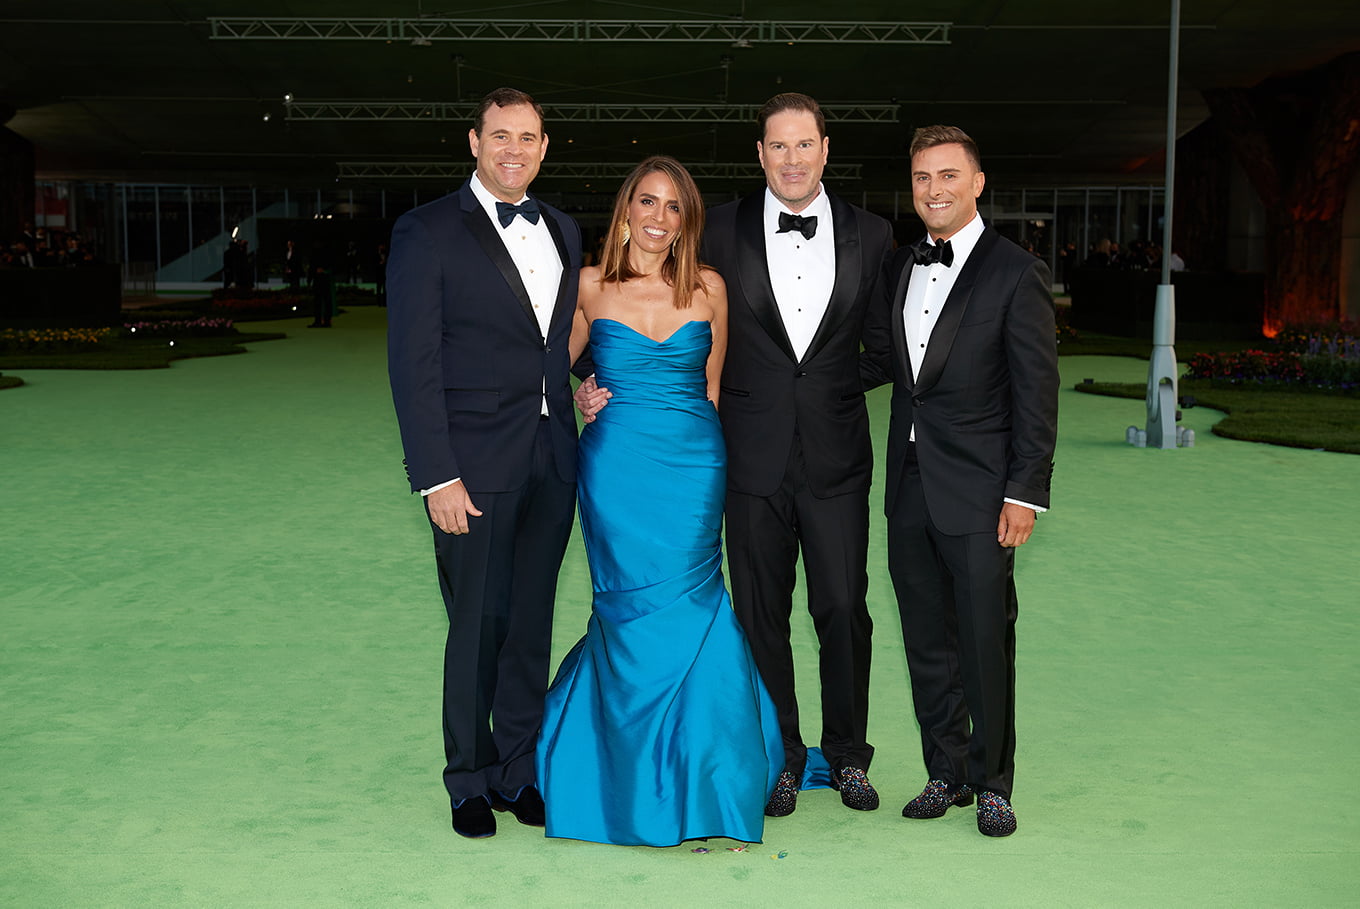 David Dolby, Natasha Dolby, Tom Dolby, Andrew First attend the Academy Museum of Motion Pictures Opening Gala, September 25, 2021